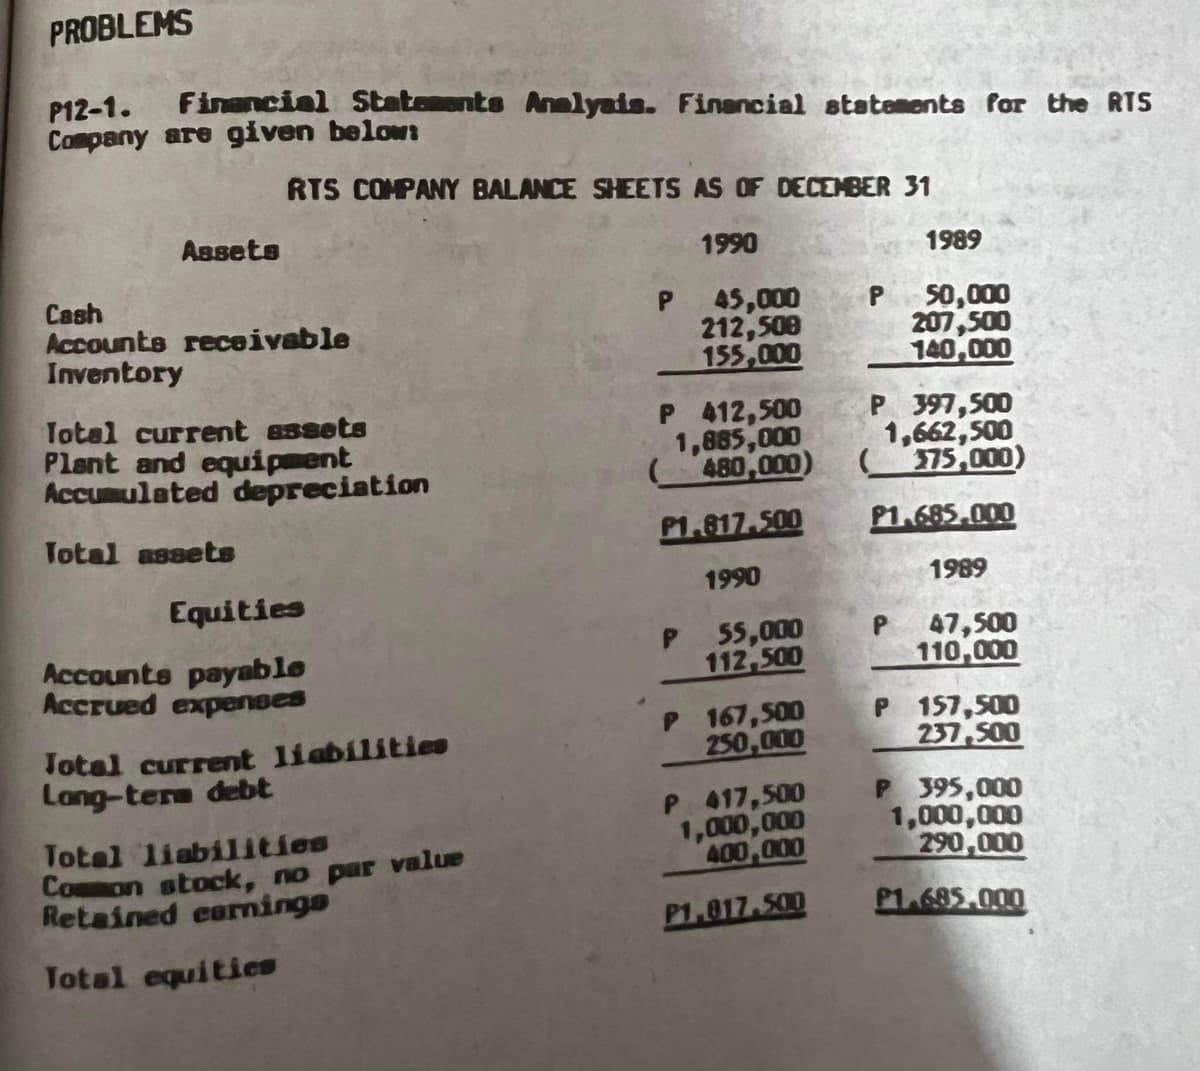 PROBLEMS
P12-1.
Company are given below:
Financial Statoments Analyais. Financial stataments for the RTS
RTS COMPANY BALANCE SHEETS AS OF DECEMBER 31
Assets
1990
1989
Cash
Accounts receivable
Inventory
45,000
212,508
155,000
50,000
207,500
140,000
Total current assets
Plant and equipment
Accumulated depreciation
P 412,500
1,885,000
480,000)
P 397,500
1,662,500
75,000)
Total assets
P1.817.500
P1.685.000
1990
1989
Equities
Accounts payable
Accrued expenses
55,000
112,500
47,500
110,000
Total current liabilities
Lang-term debt
P 167,500
250,000
P 157,500
237 500
Total liabilities
Coon stock, no par value
Retained eorninge
P 417,500
1,000,000
400,000
P 395,000
1,000,000
290,000
P1.817.500
P1.685.000
Total equities
